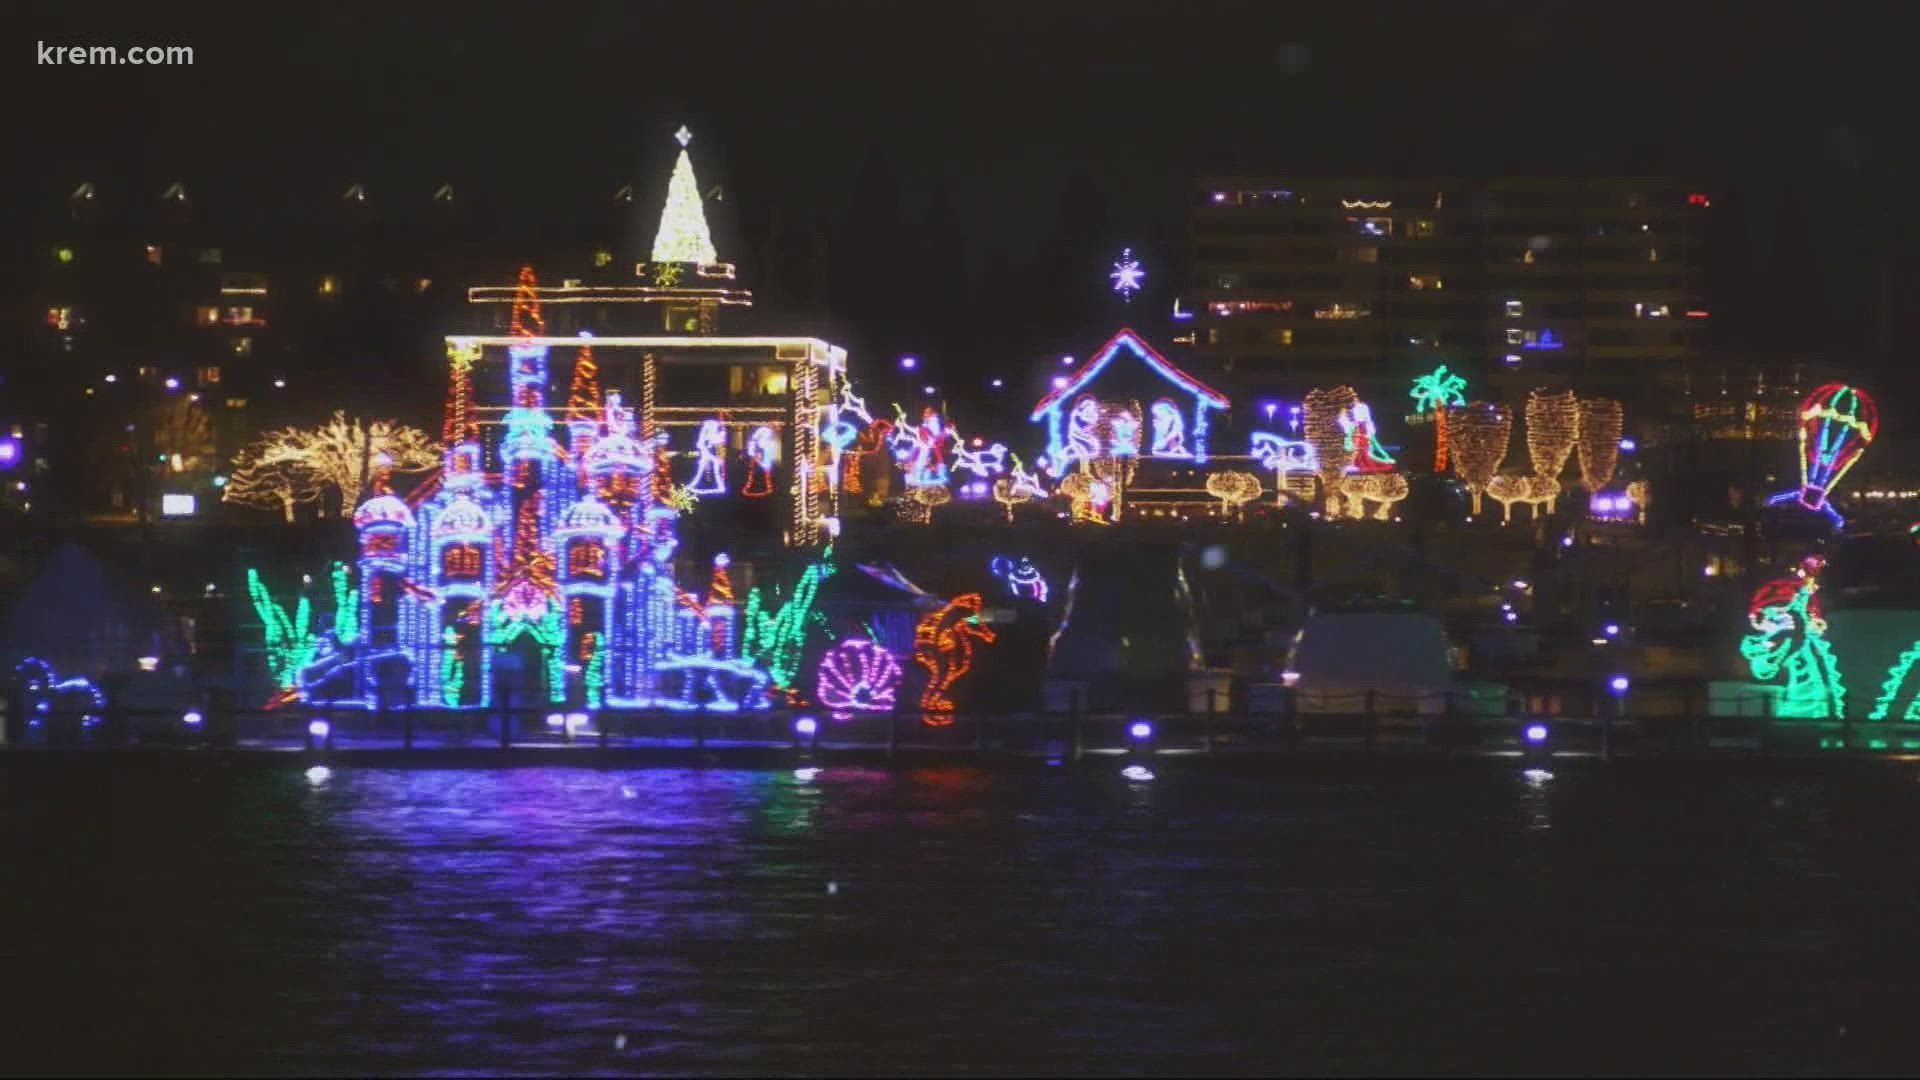 The tradition has been named one of America’s top holiday attraction. Tickets are now on sale for its 35th annual celebration.